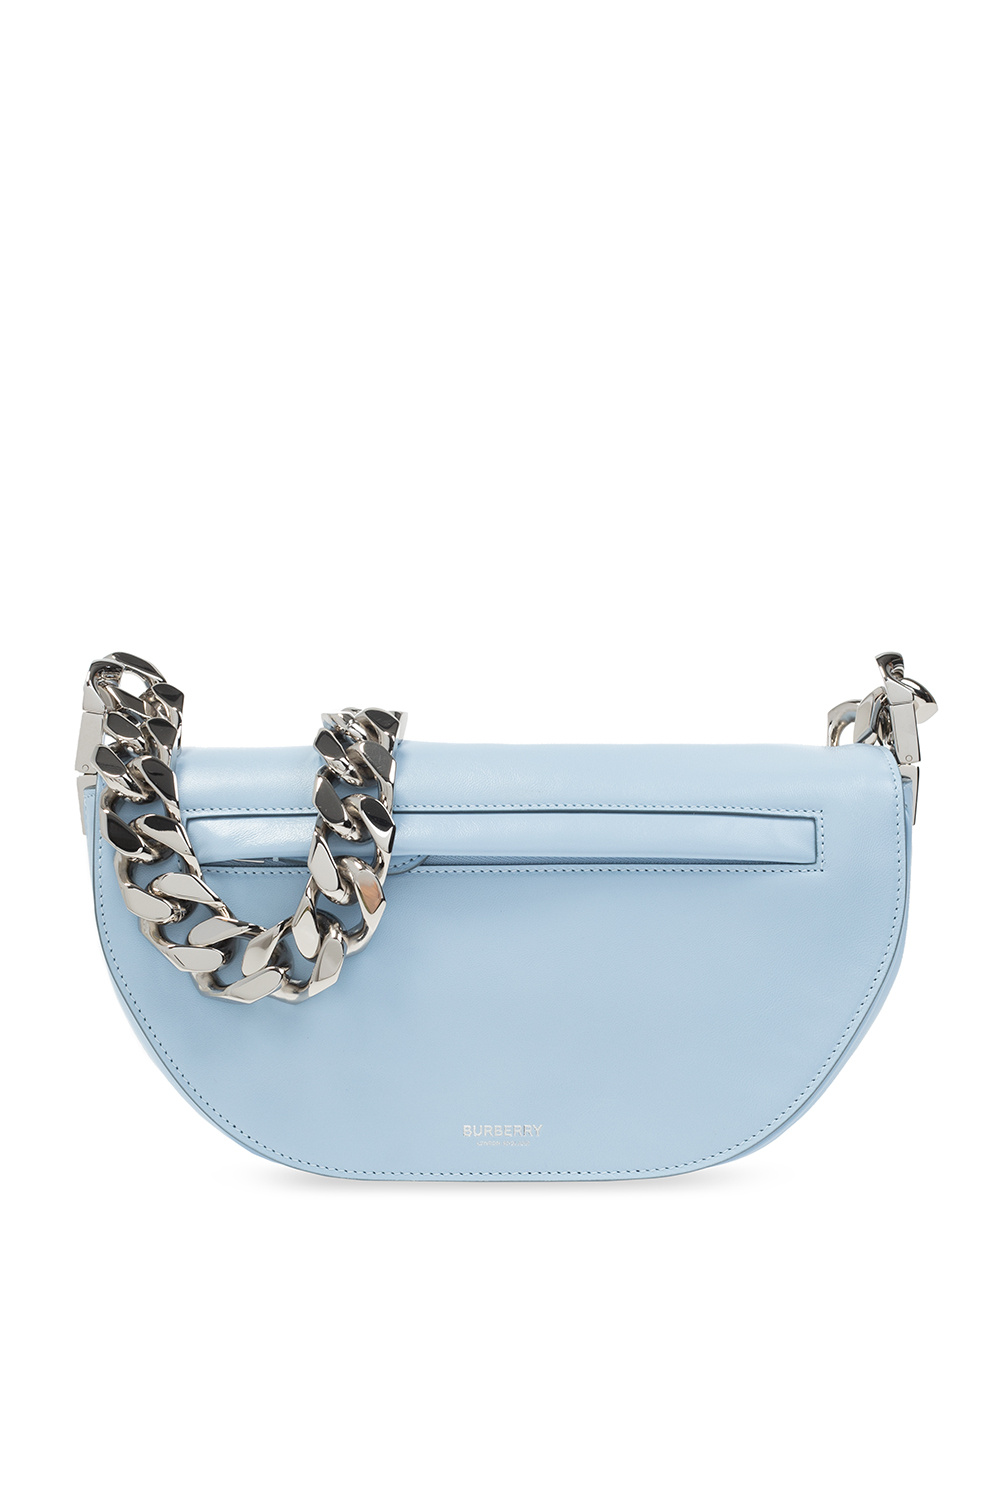 Olympia printed leather shoulder bag